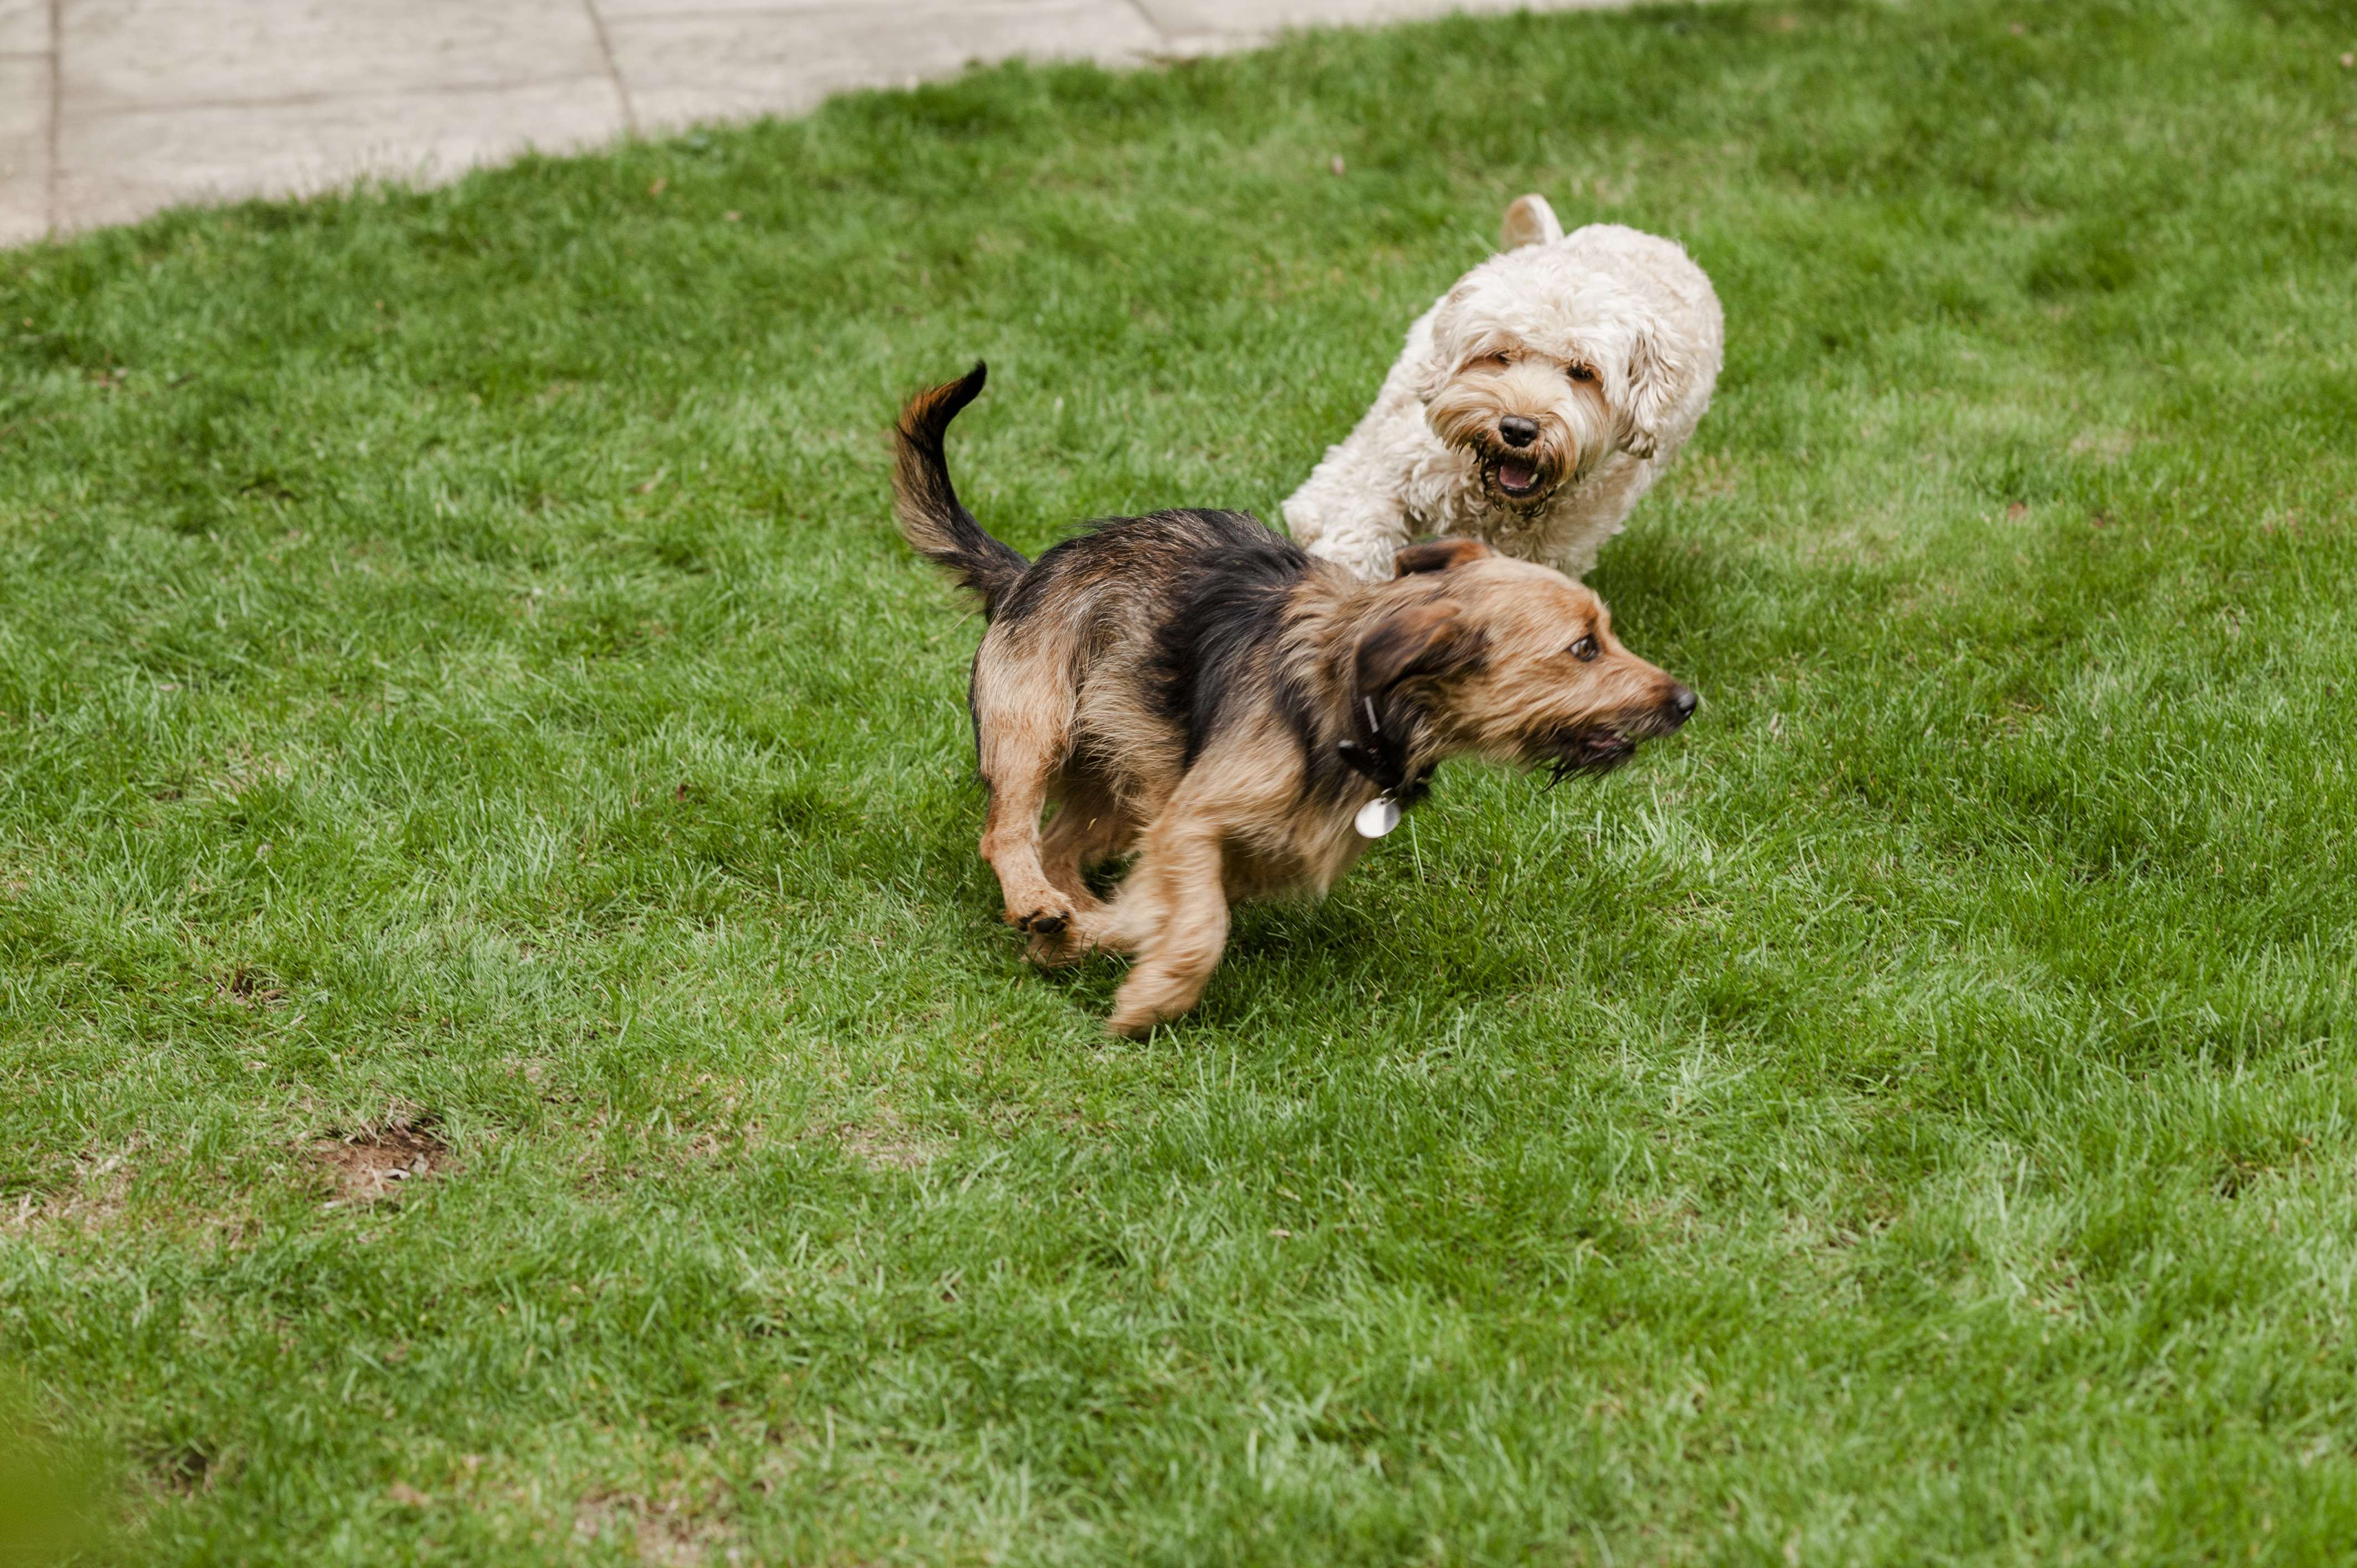 Two dogs running around a garden on the grass